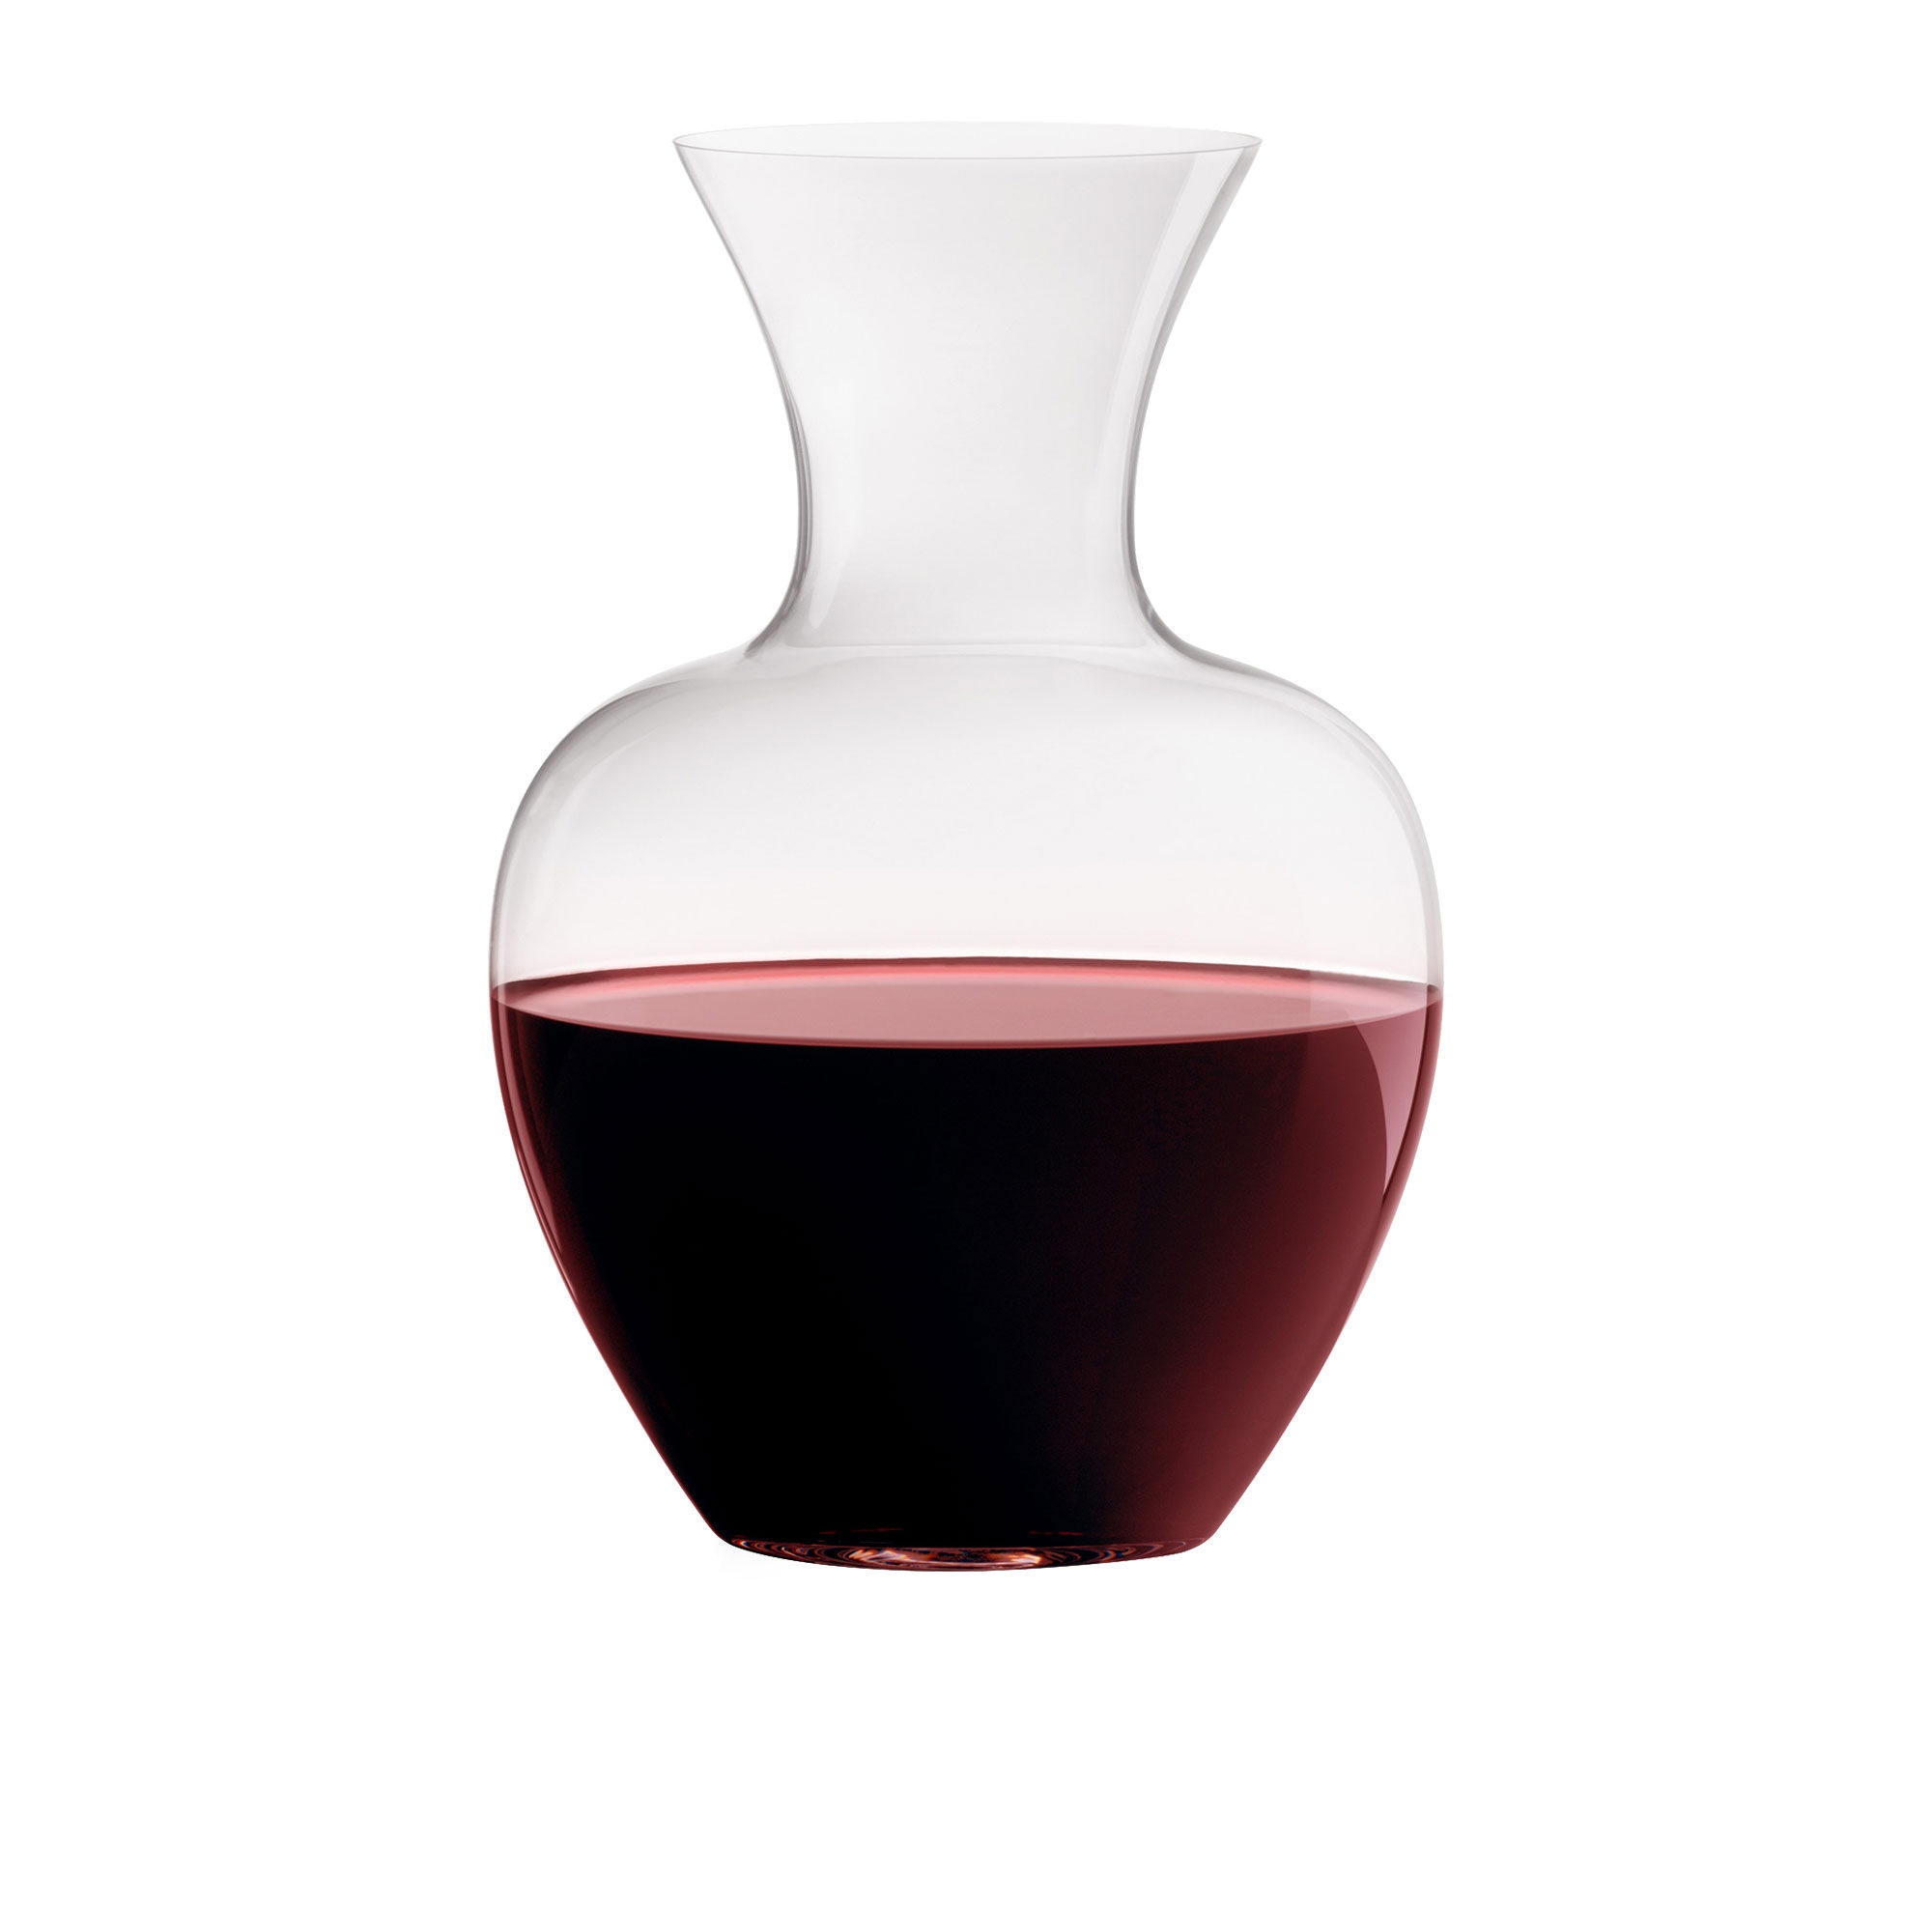 Riedel Apple NY Decanter 1.5L Image 1